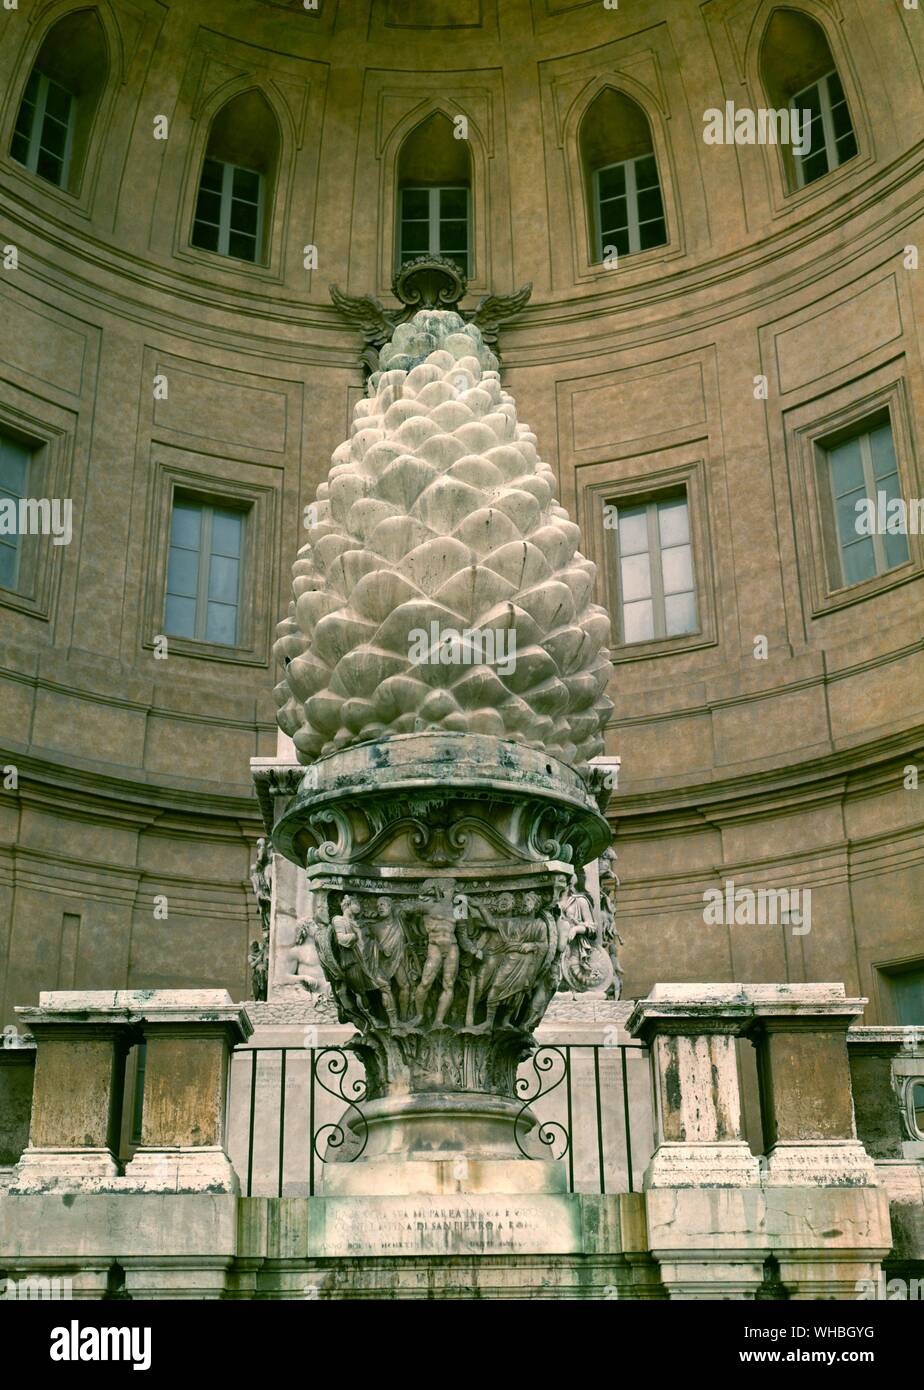 The Pigna fountain at St. Peter's in Rome - Pigna is the name of rione IX of Rome. The name means pine cone in Italian, and the symbol for the rione is the colossal bronze pine cone, the Pigna, which decorated a fountain in Ancient Rome next to a vast Temple of Isis. There water flowed copiously from the top of the pinecone. The Pigna was moved first to the old basilica of St. Peter's, where Dante saw it. In the 15th century it was moved to its current location, the upper end of Bramante's Cortile del Belvedere, which is now usually called in its honour the Cortile della Pigna, linking the Stock Photo